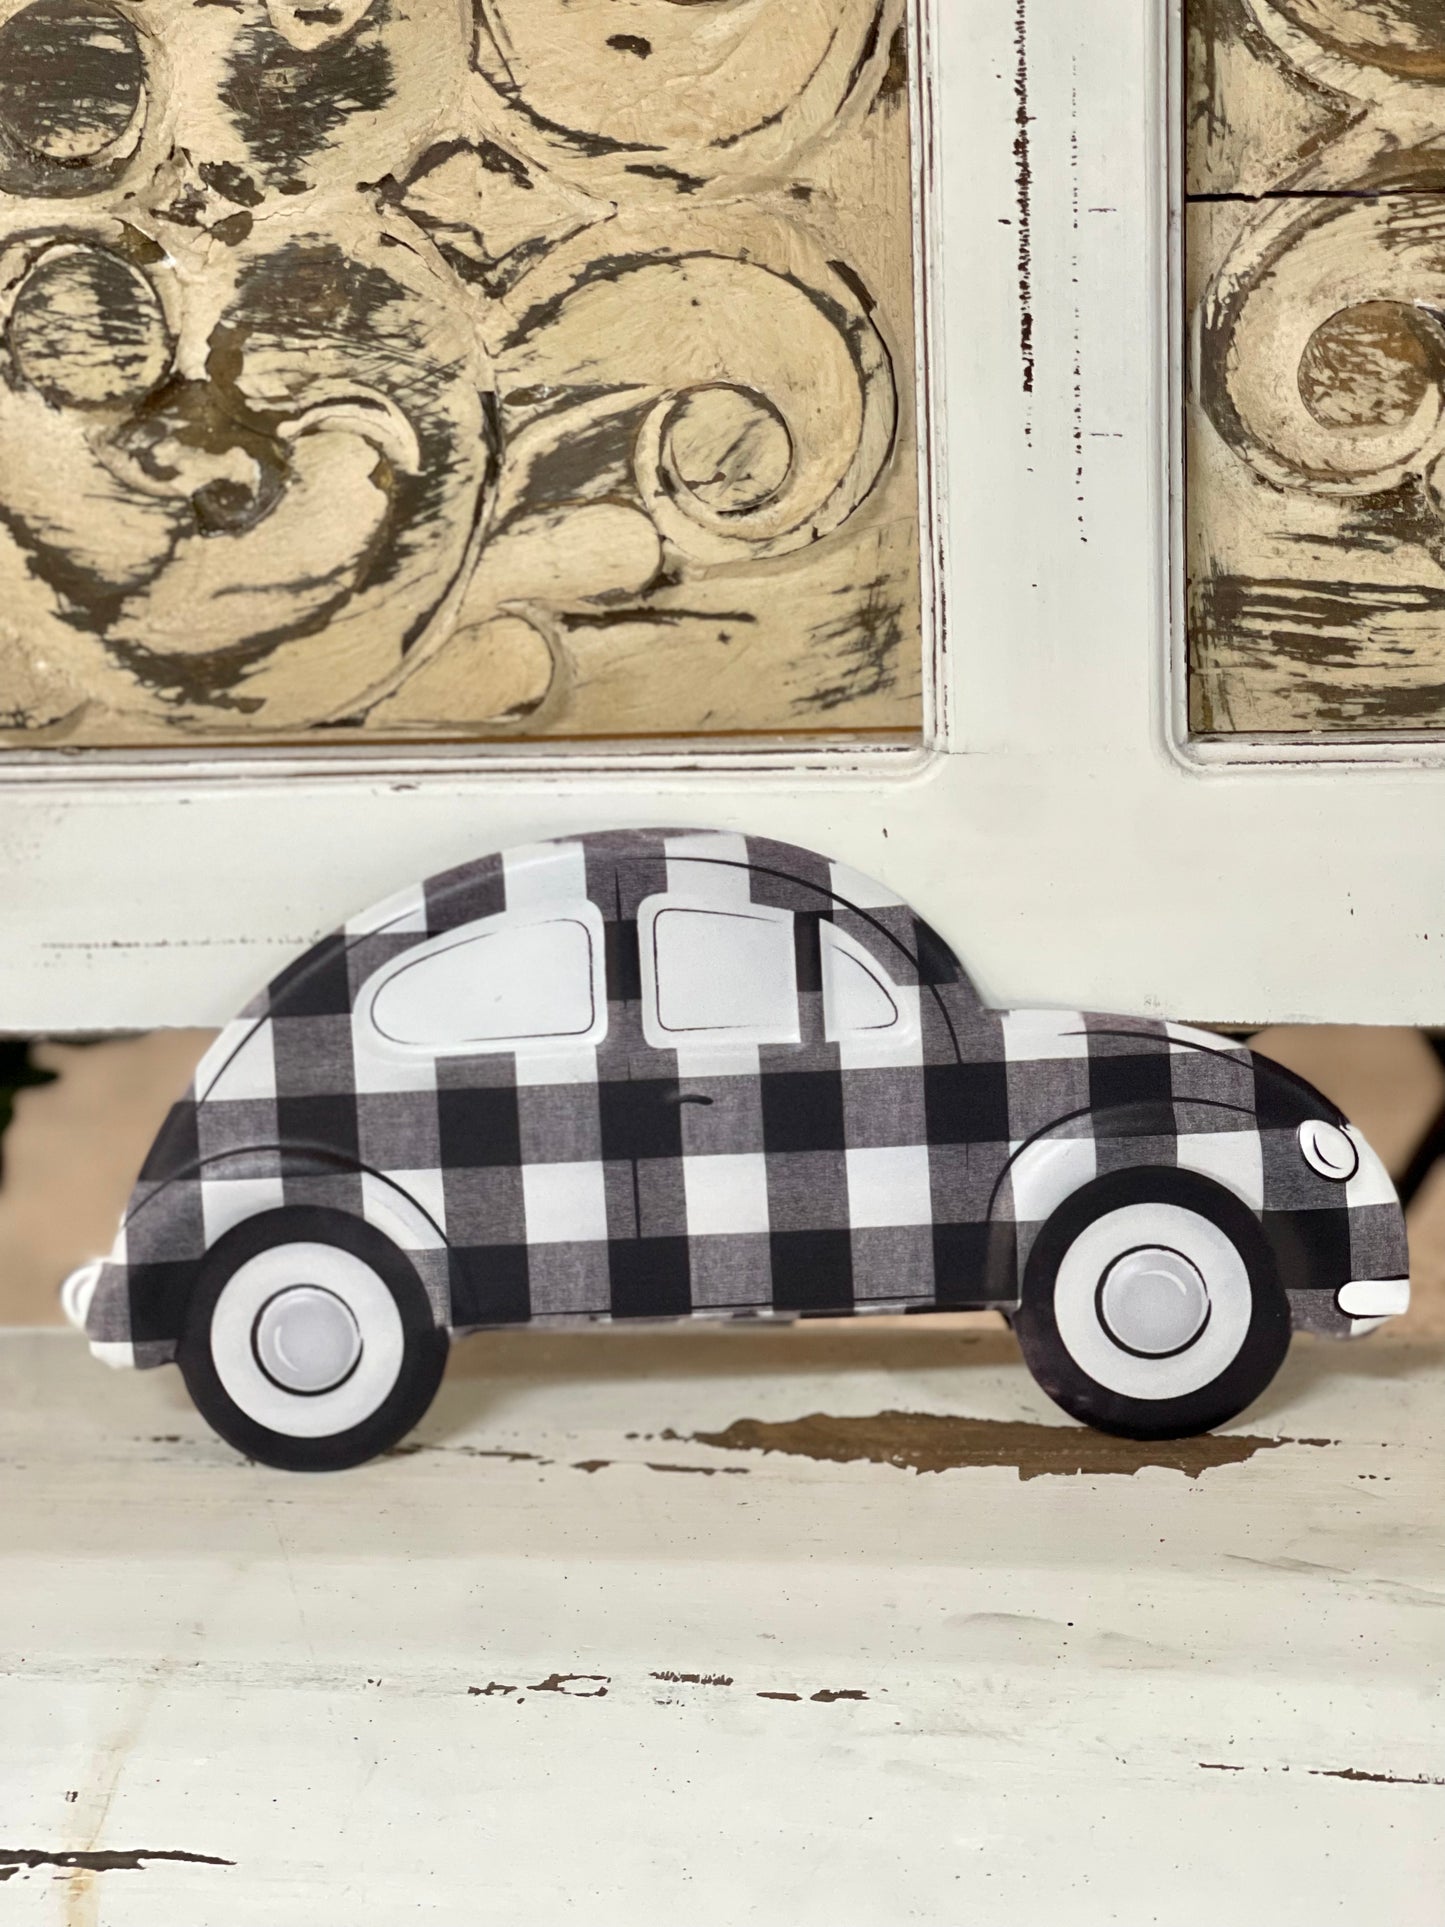 Embossed Black And White Checked Vintage Bug